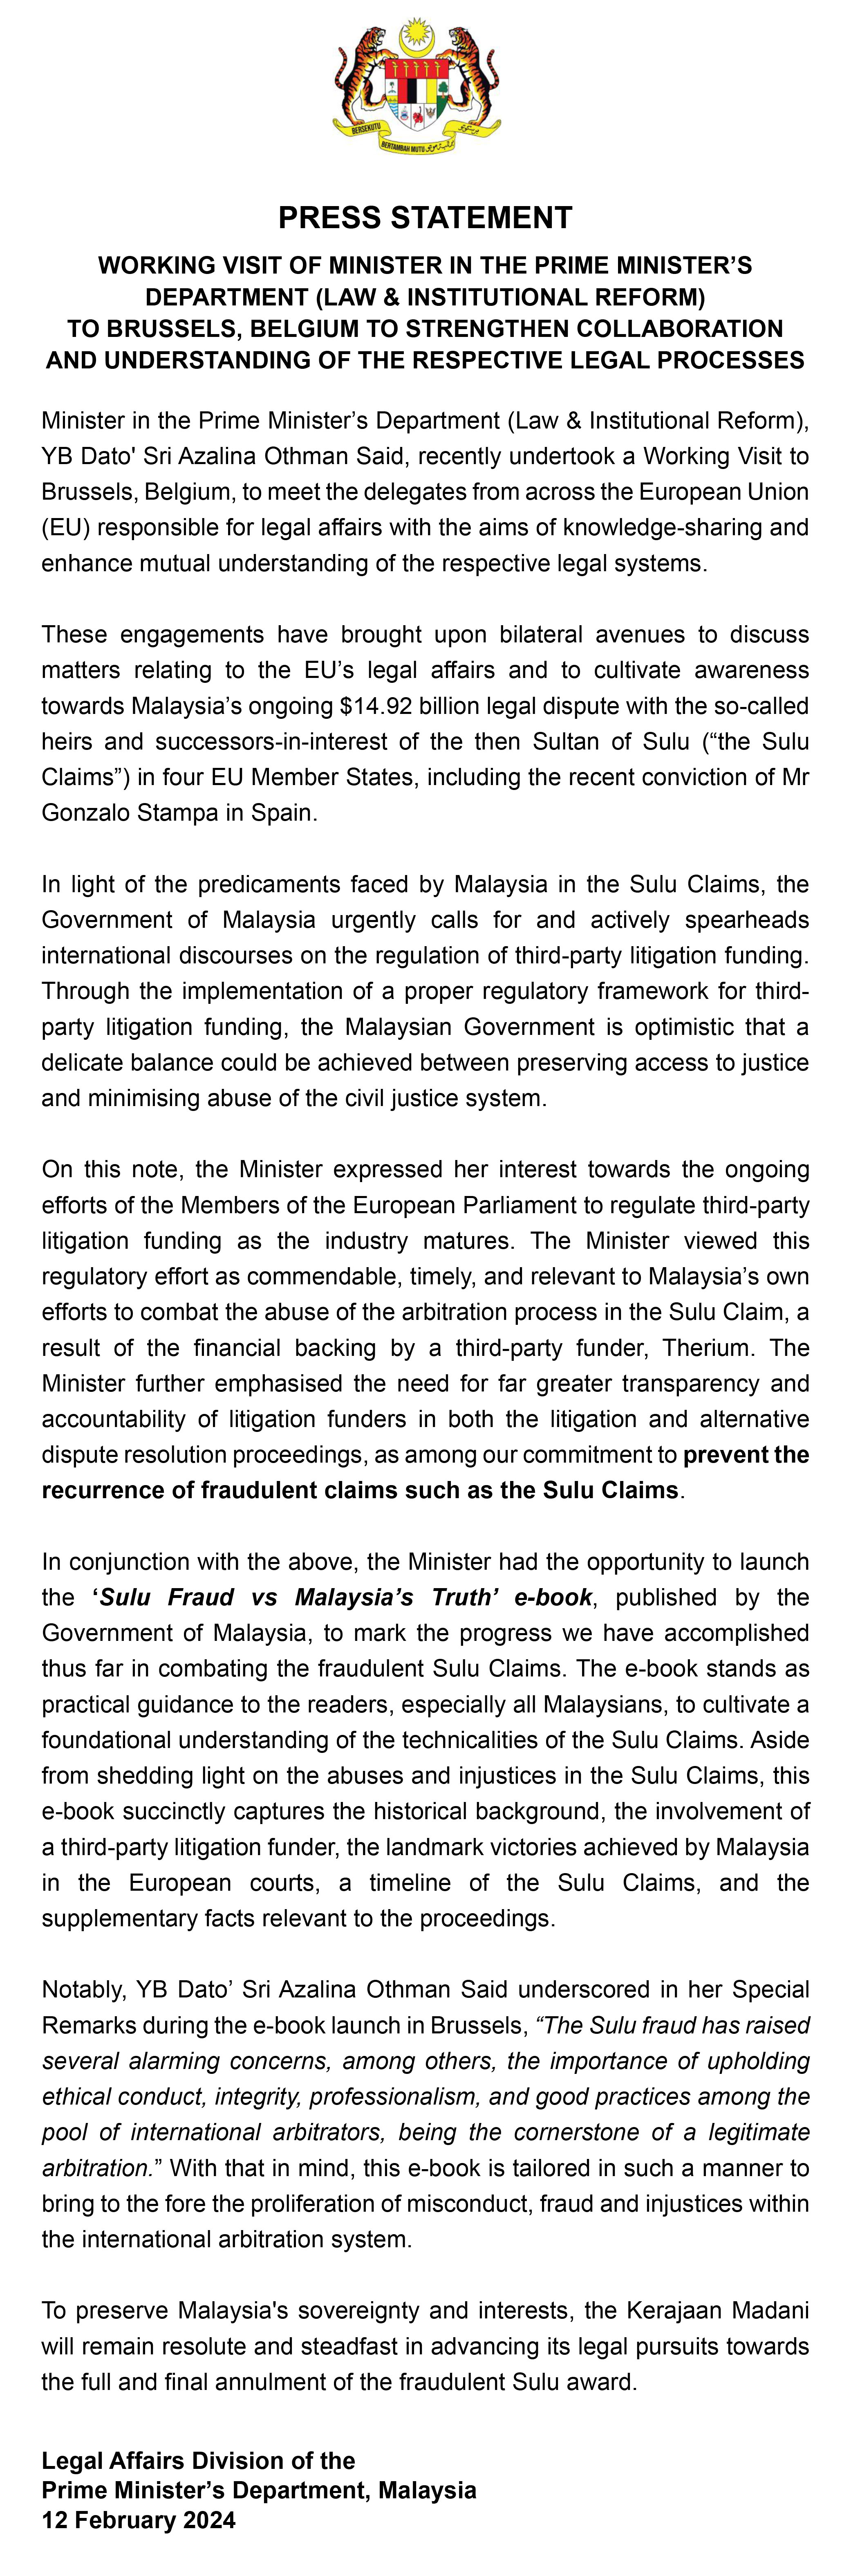 PRESS STATEMENT ON YB MINISTER IN THE PRIME MINISTER’S DEPARTMENT (LAW & INSTITUTIONAL REFORM)’s WORKING VISIT